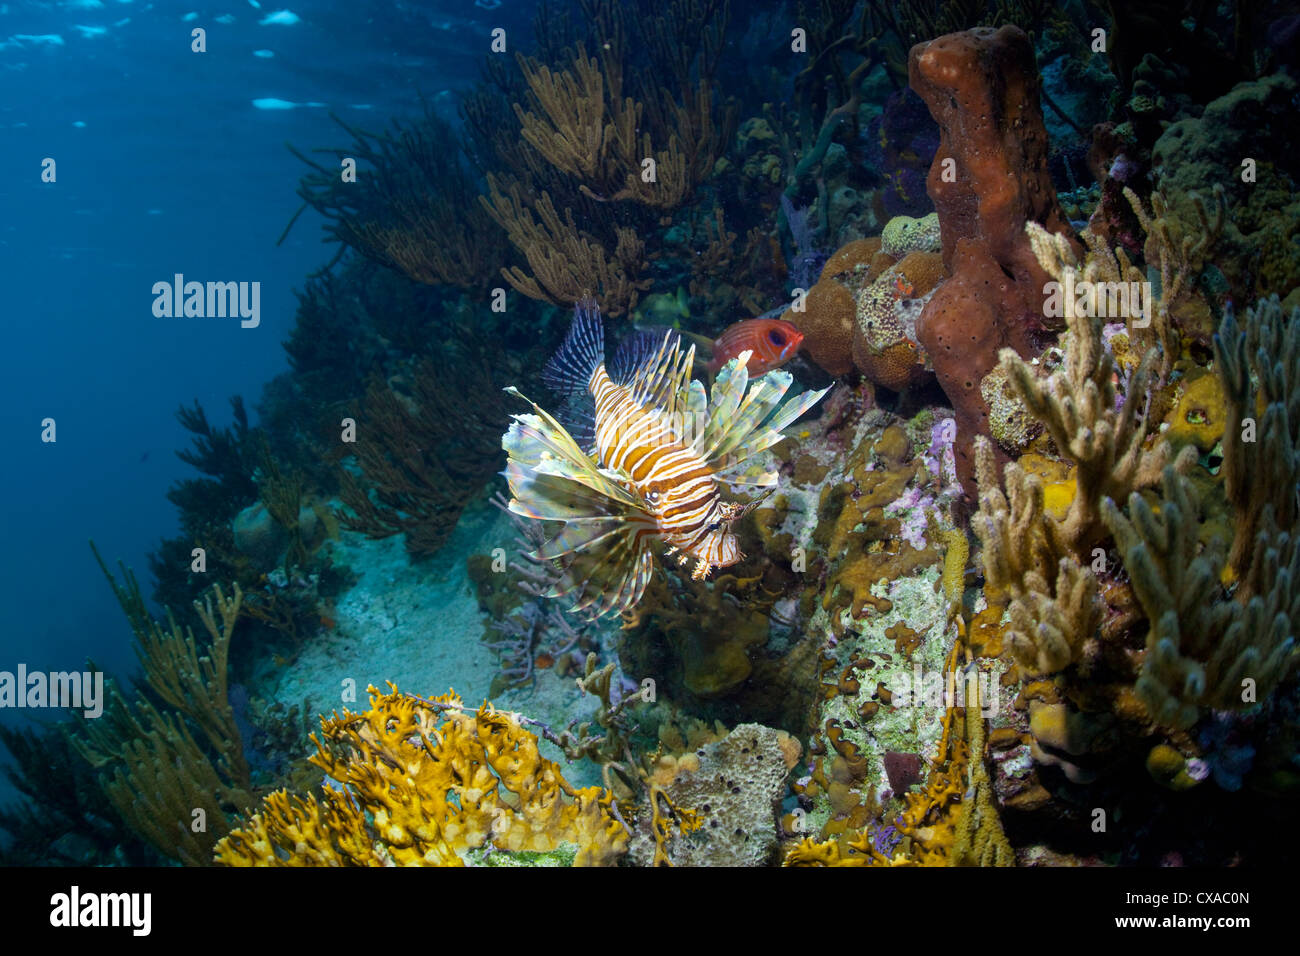 A lionfish on a coral reef at the Bahamas. Stock Photo